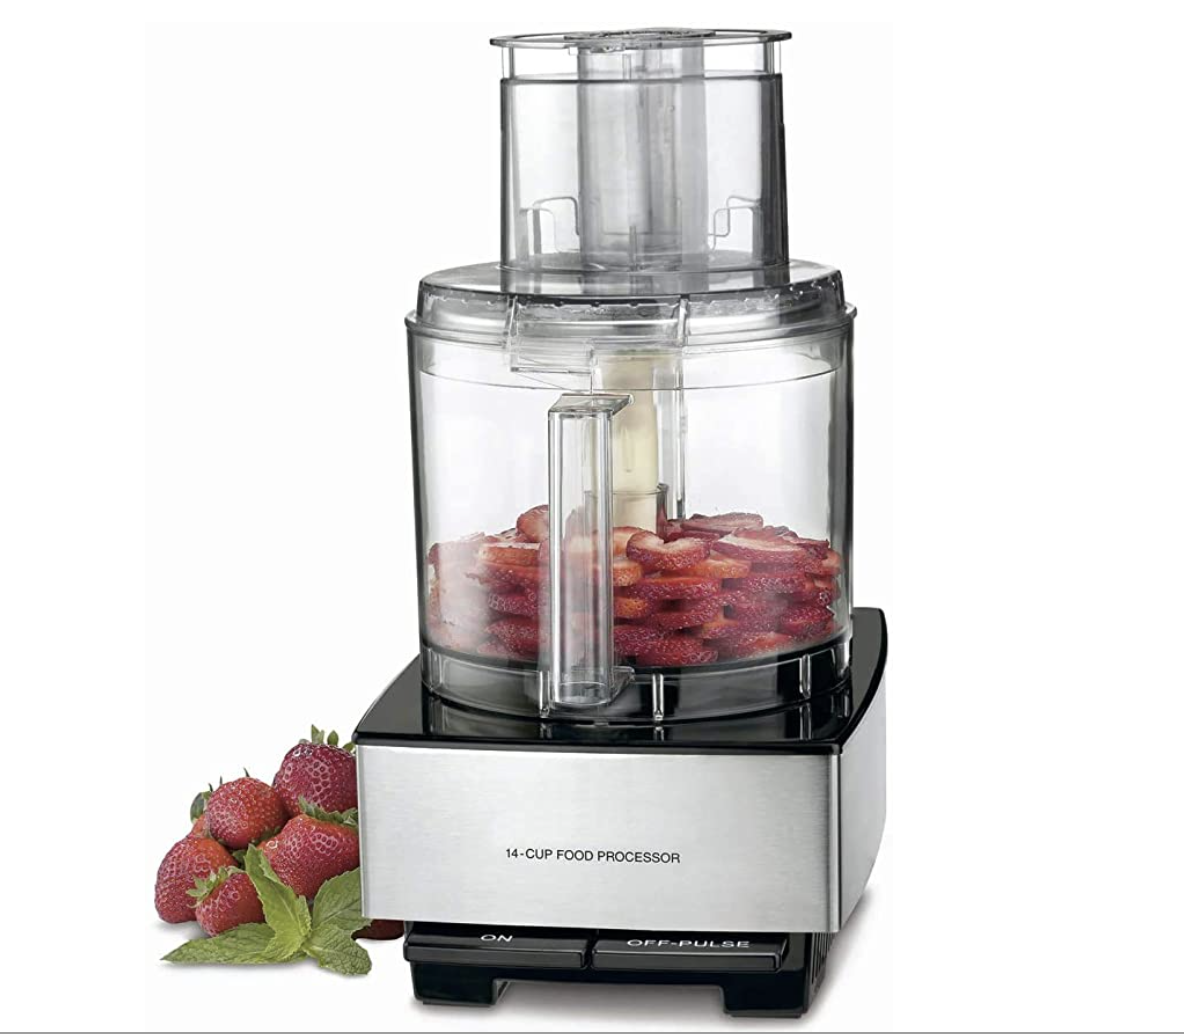 Cuisinart 14 Cup Food Processor Review - Efficiency and Versatility Combined